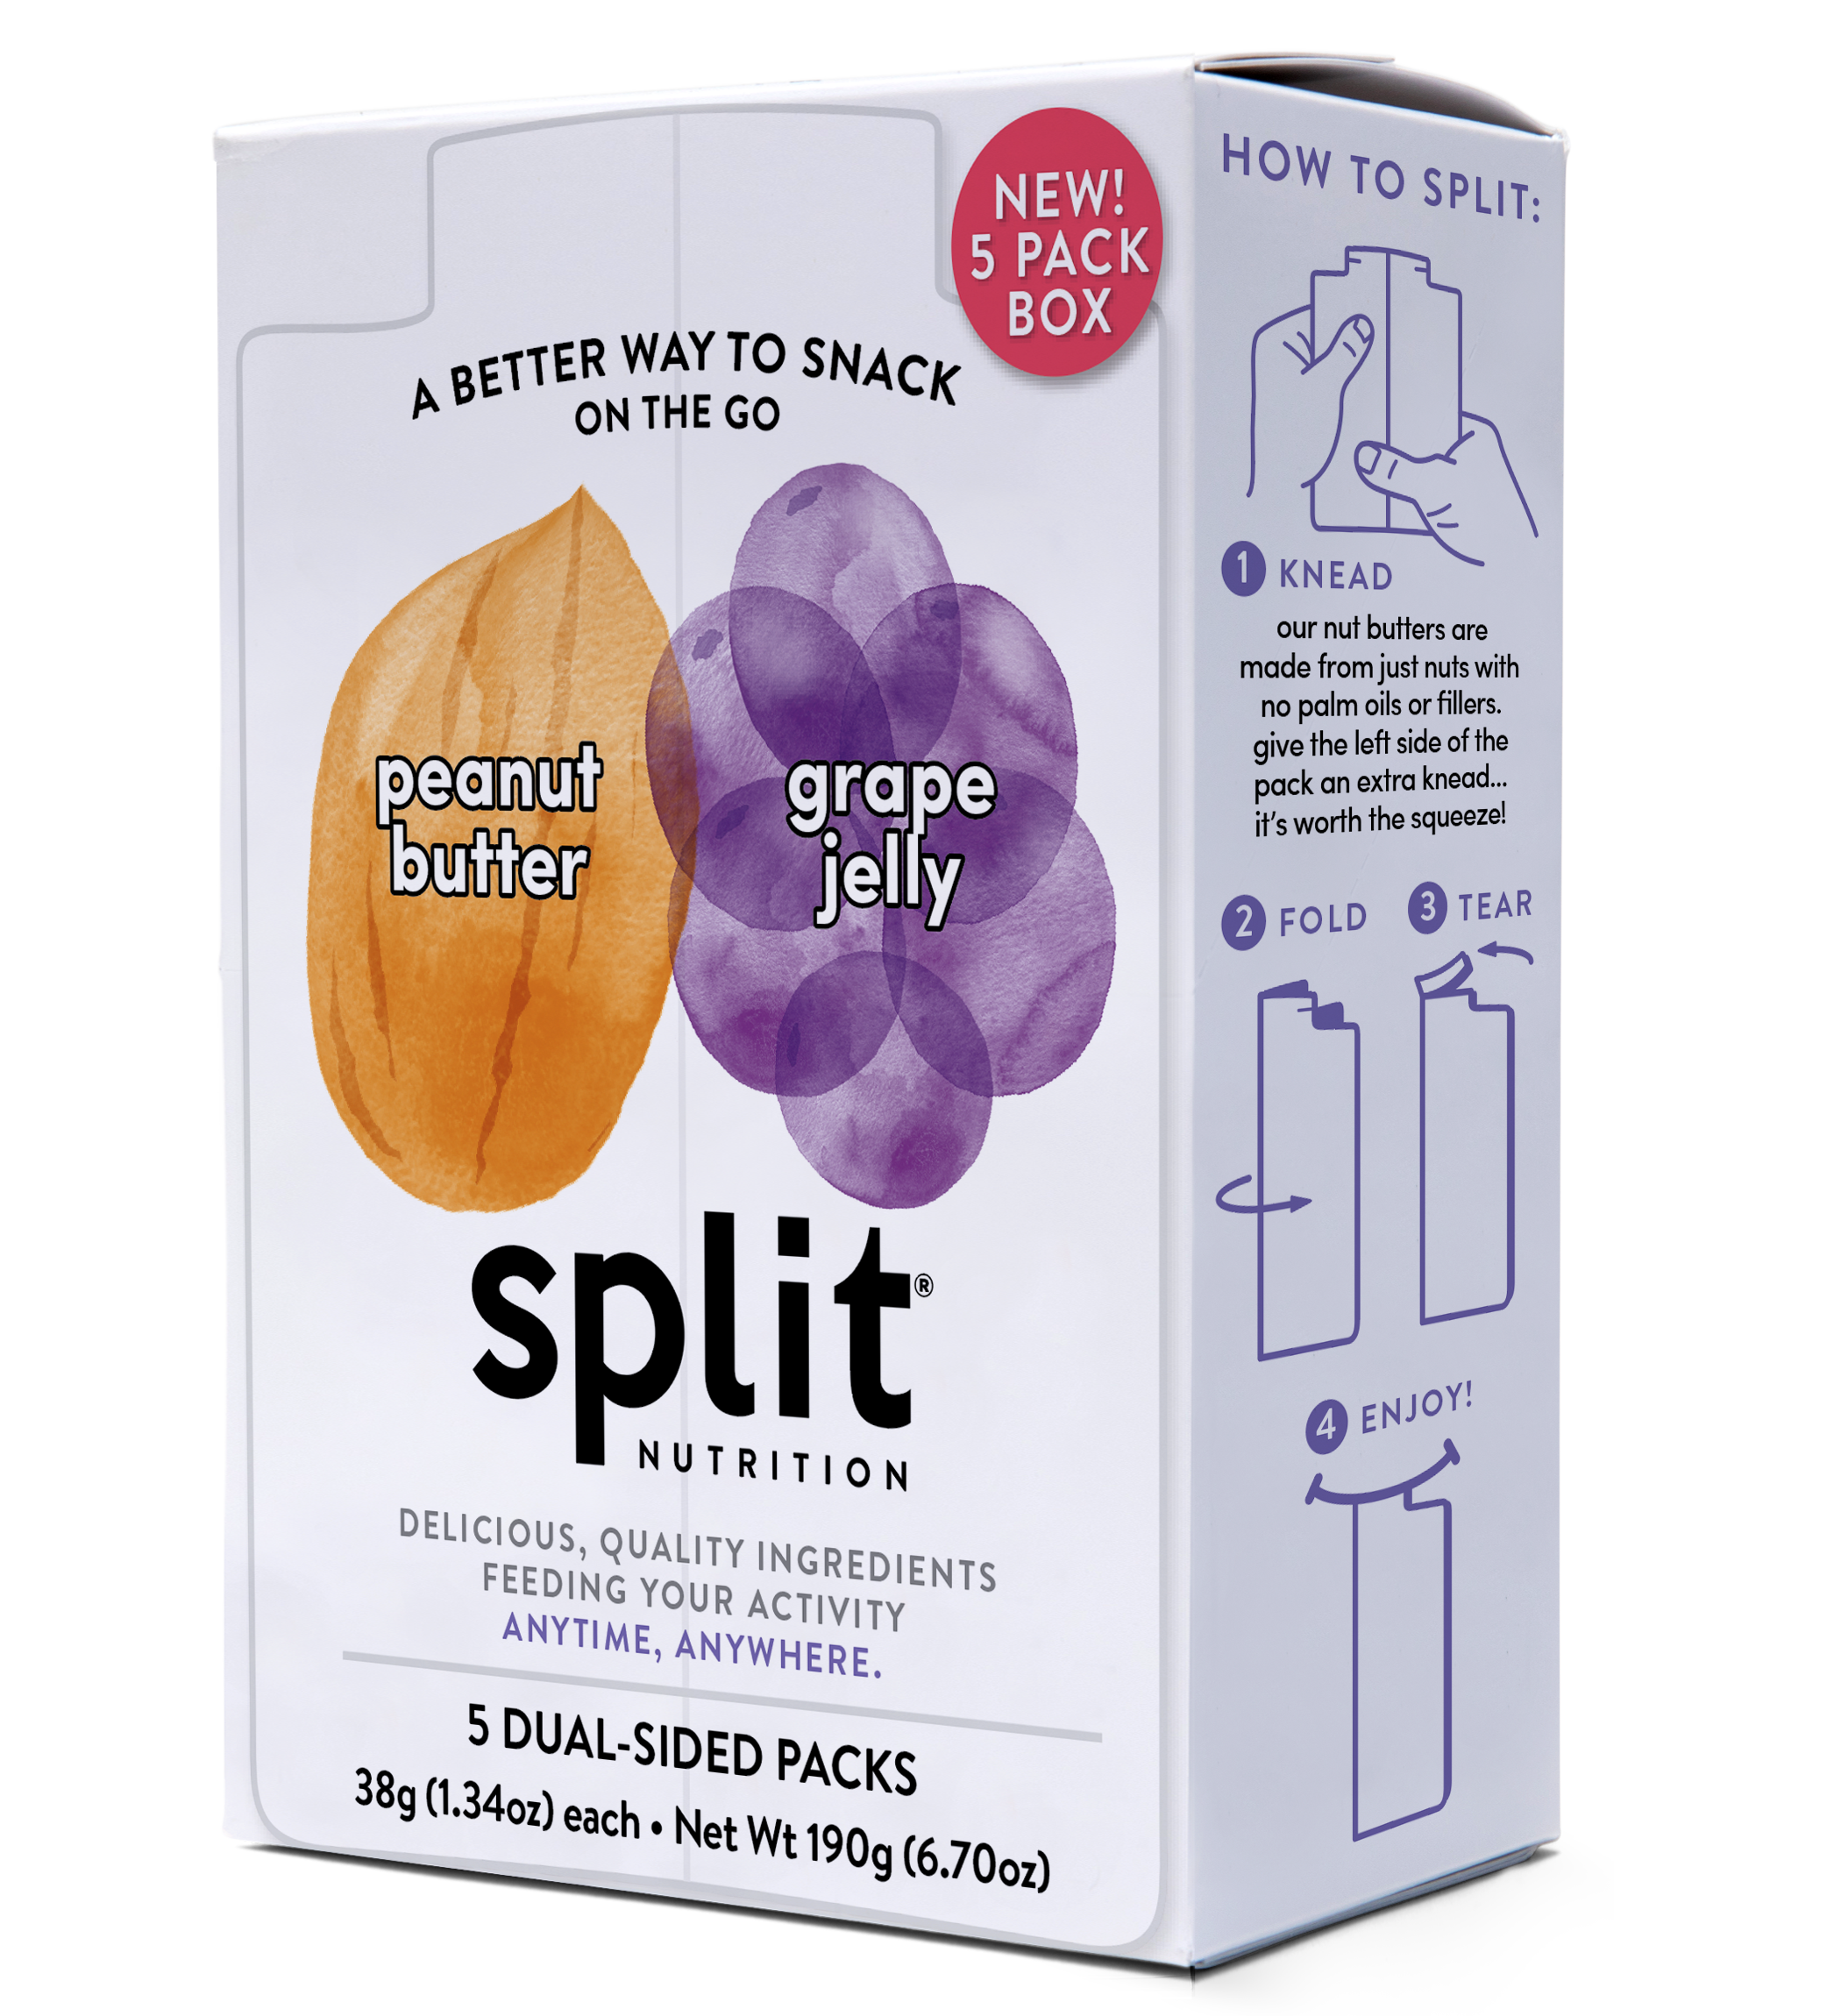 Split Nutrition Peanut Butter and  Grape Jelly (5ct box) 8 innerpacks per case 6.7 oz